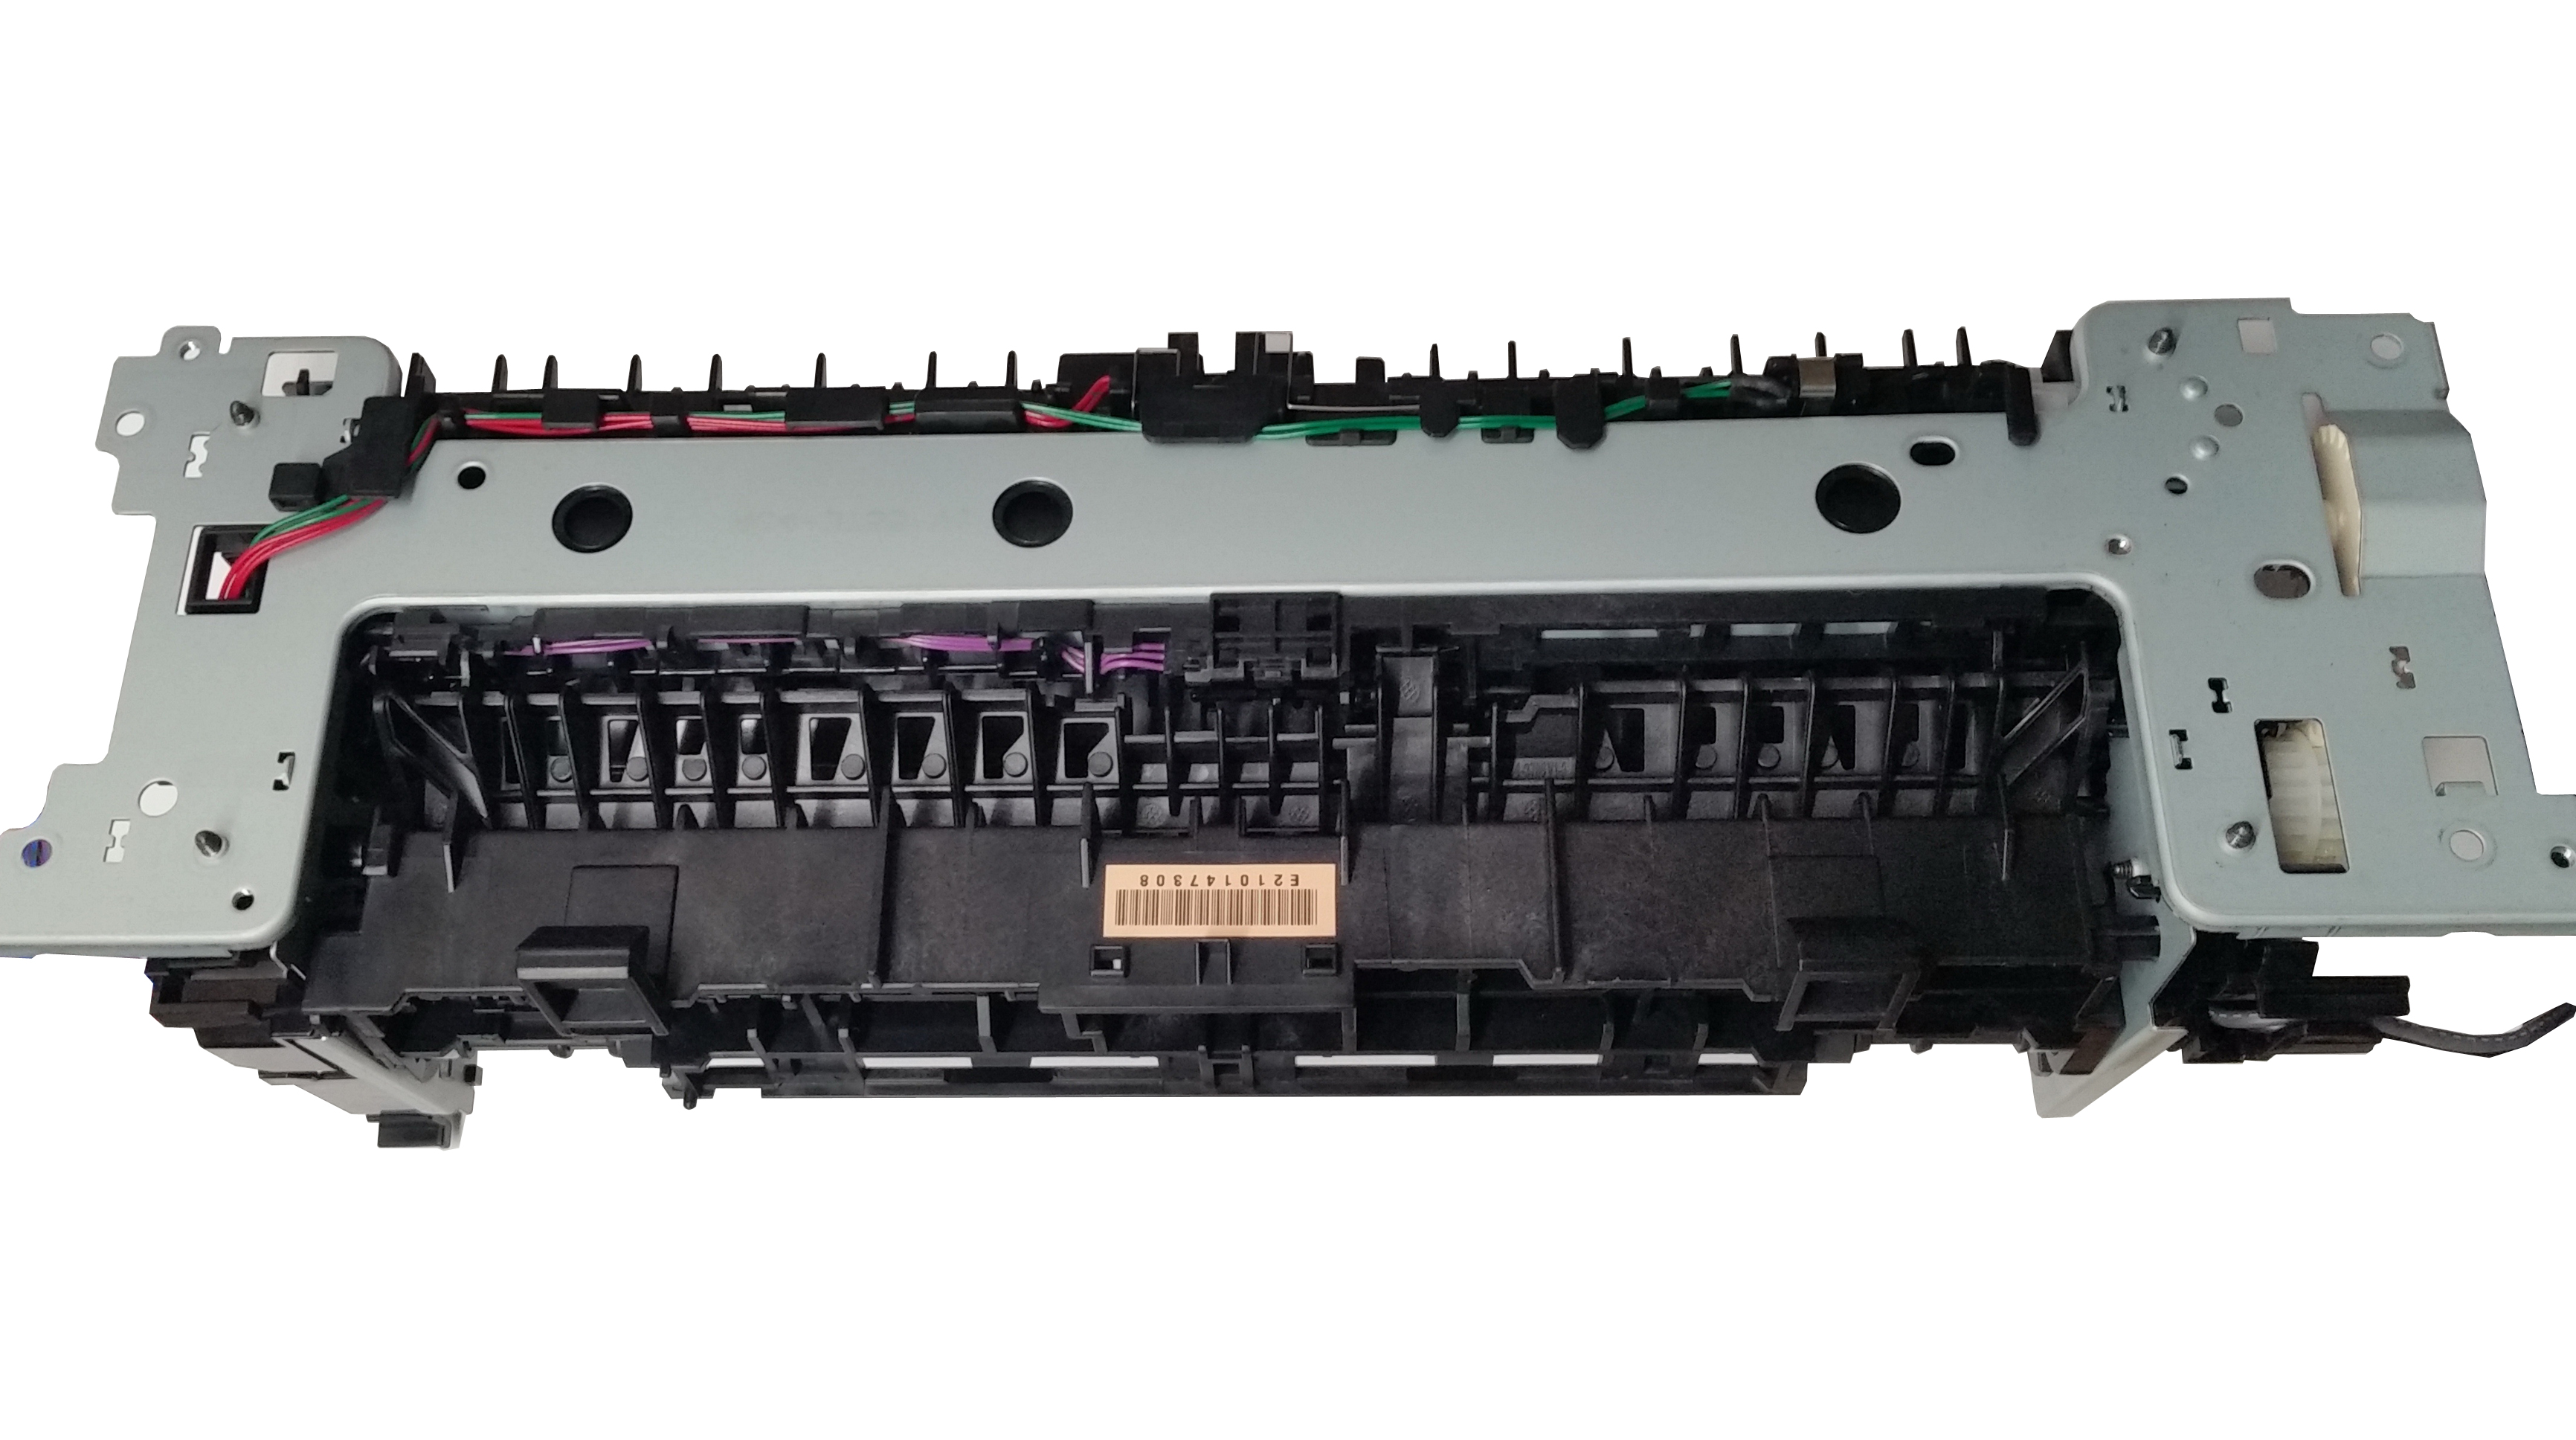 Fuser Unit assembly HP M252, new and Original HP